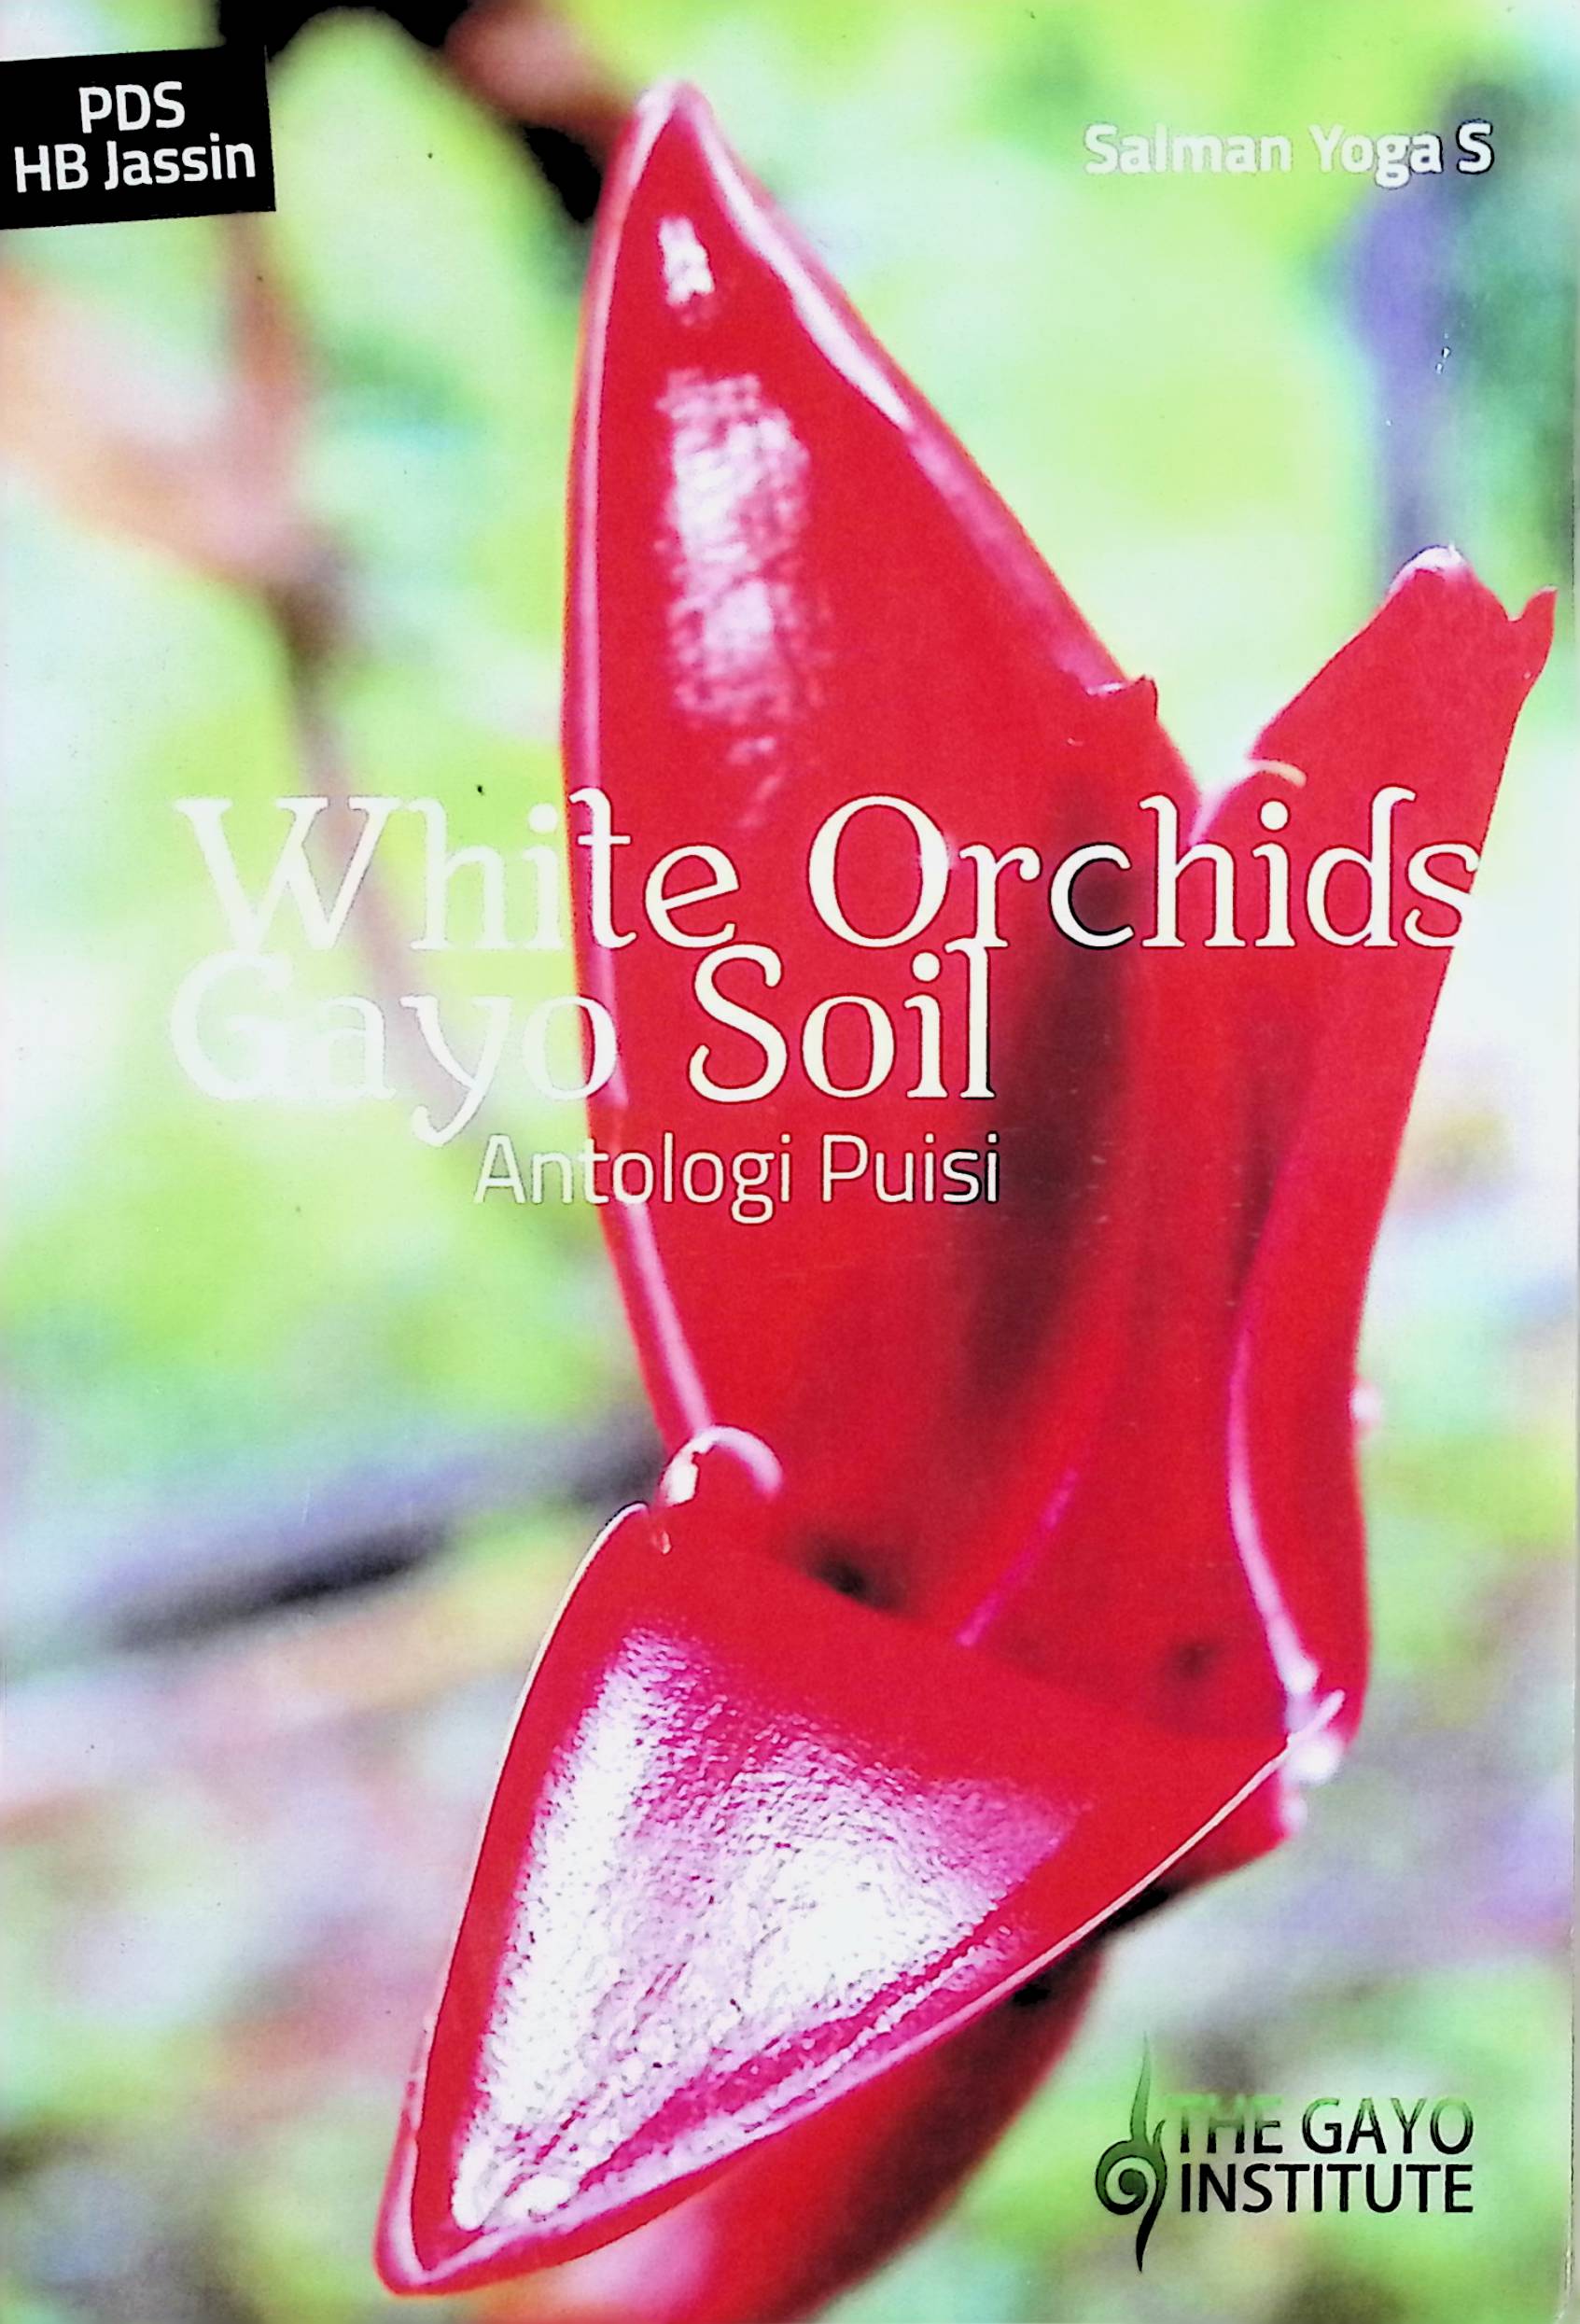 White orchids Gayo soil